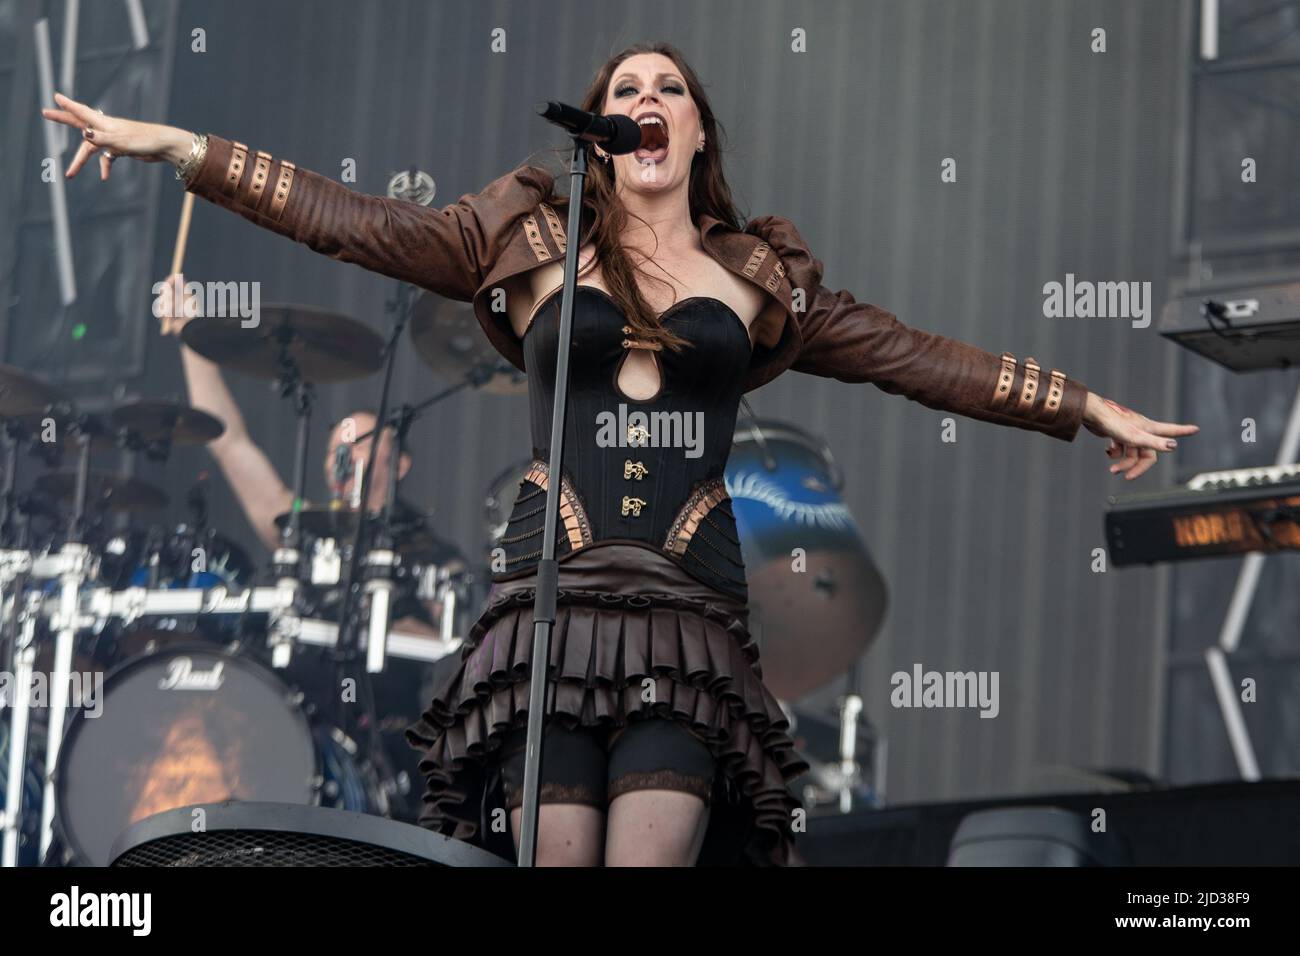 Landgraaf, Belgium. 17th June, 2022. 2022-06-17 17:34:54 LANDGRAAF - The Icelandic rock band Nightwish with lead singer Floor Jansen will perform during the first day of the Pinkpop music festival. ANP PAUL BERGEN netherlands out - belgium out Credit: ANP/Alamy Live News Stock Photo